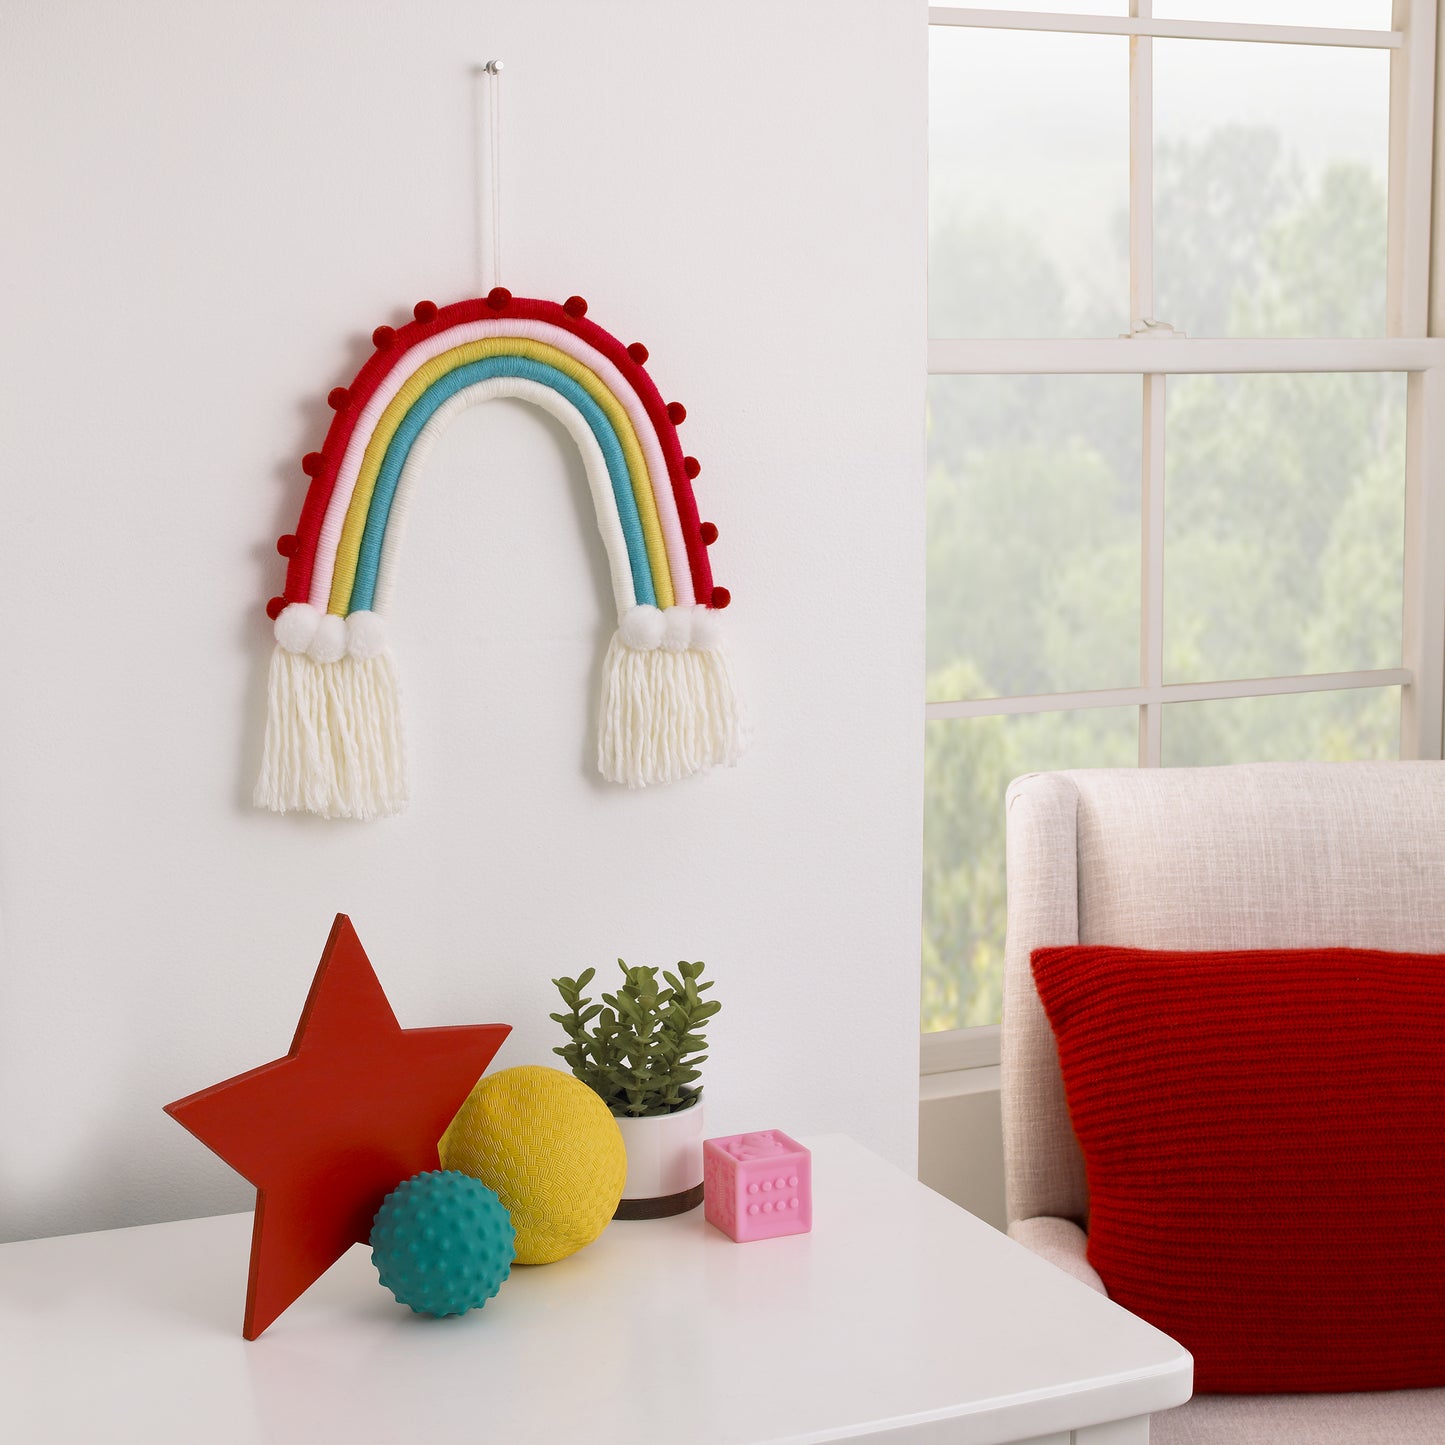 Little Love by NoJo Rainbow Tapestry Red, Pink, Yellow, Blue and White Yarn Wall Décor